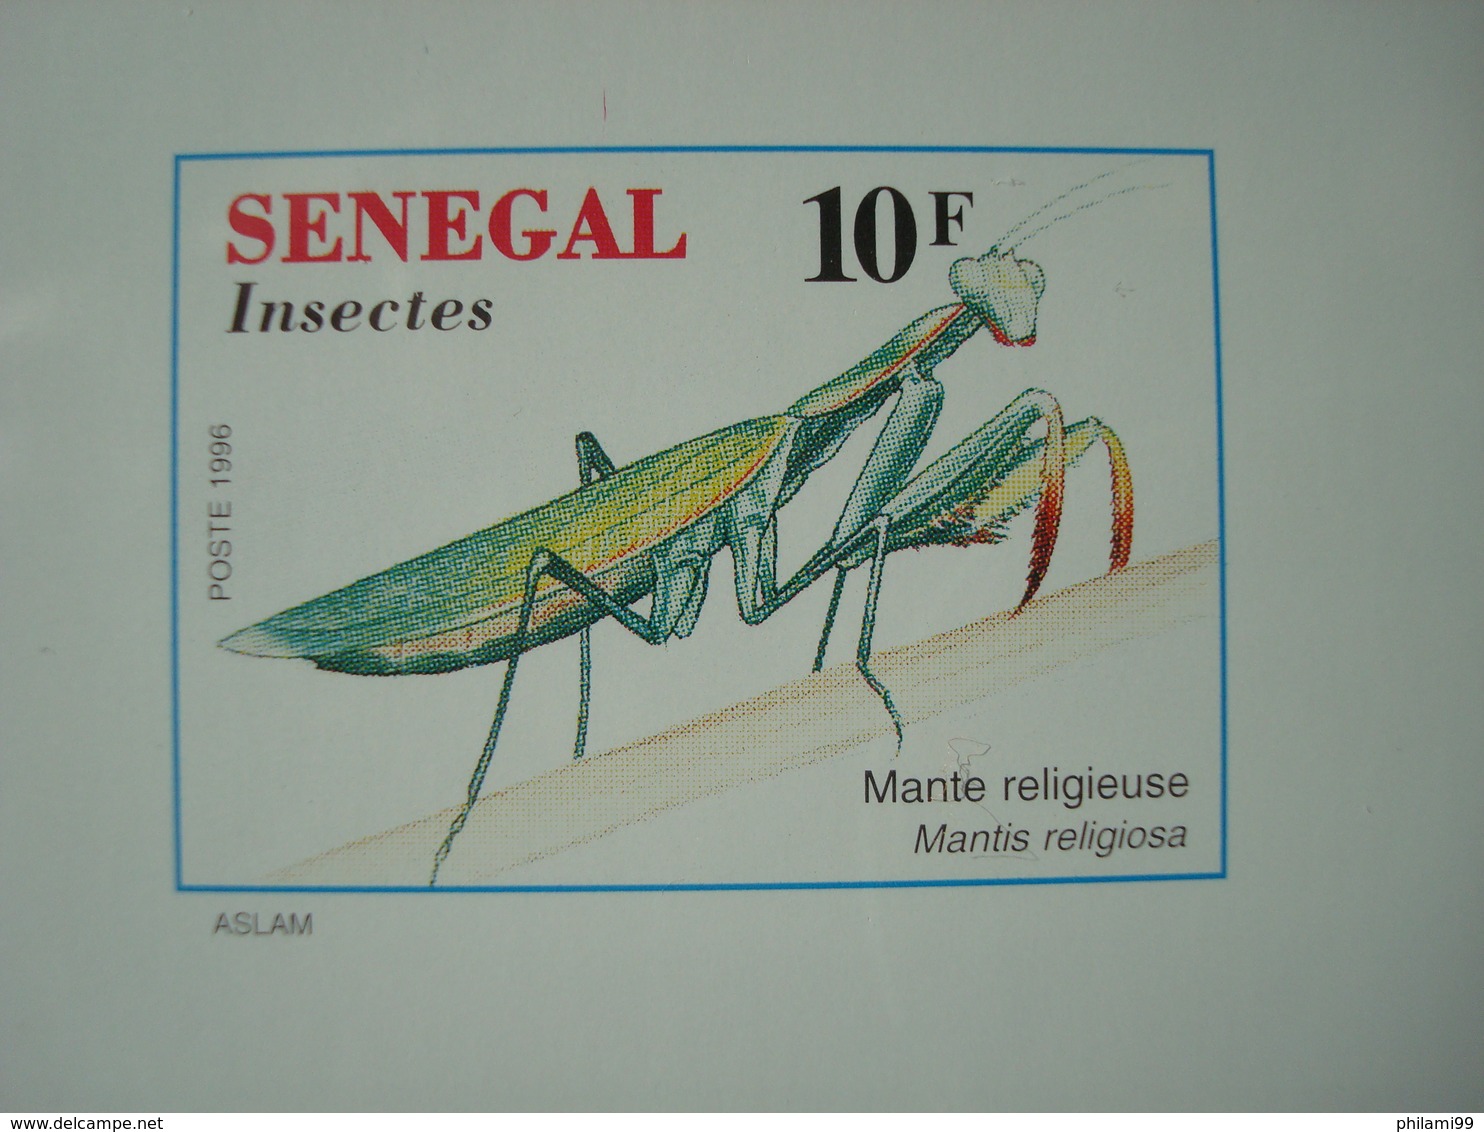 SENEGAL 1996 INSECTS 5 LUXE PROOFS - Sénégal (1960-...)